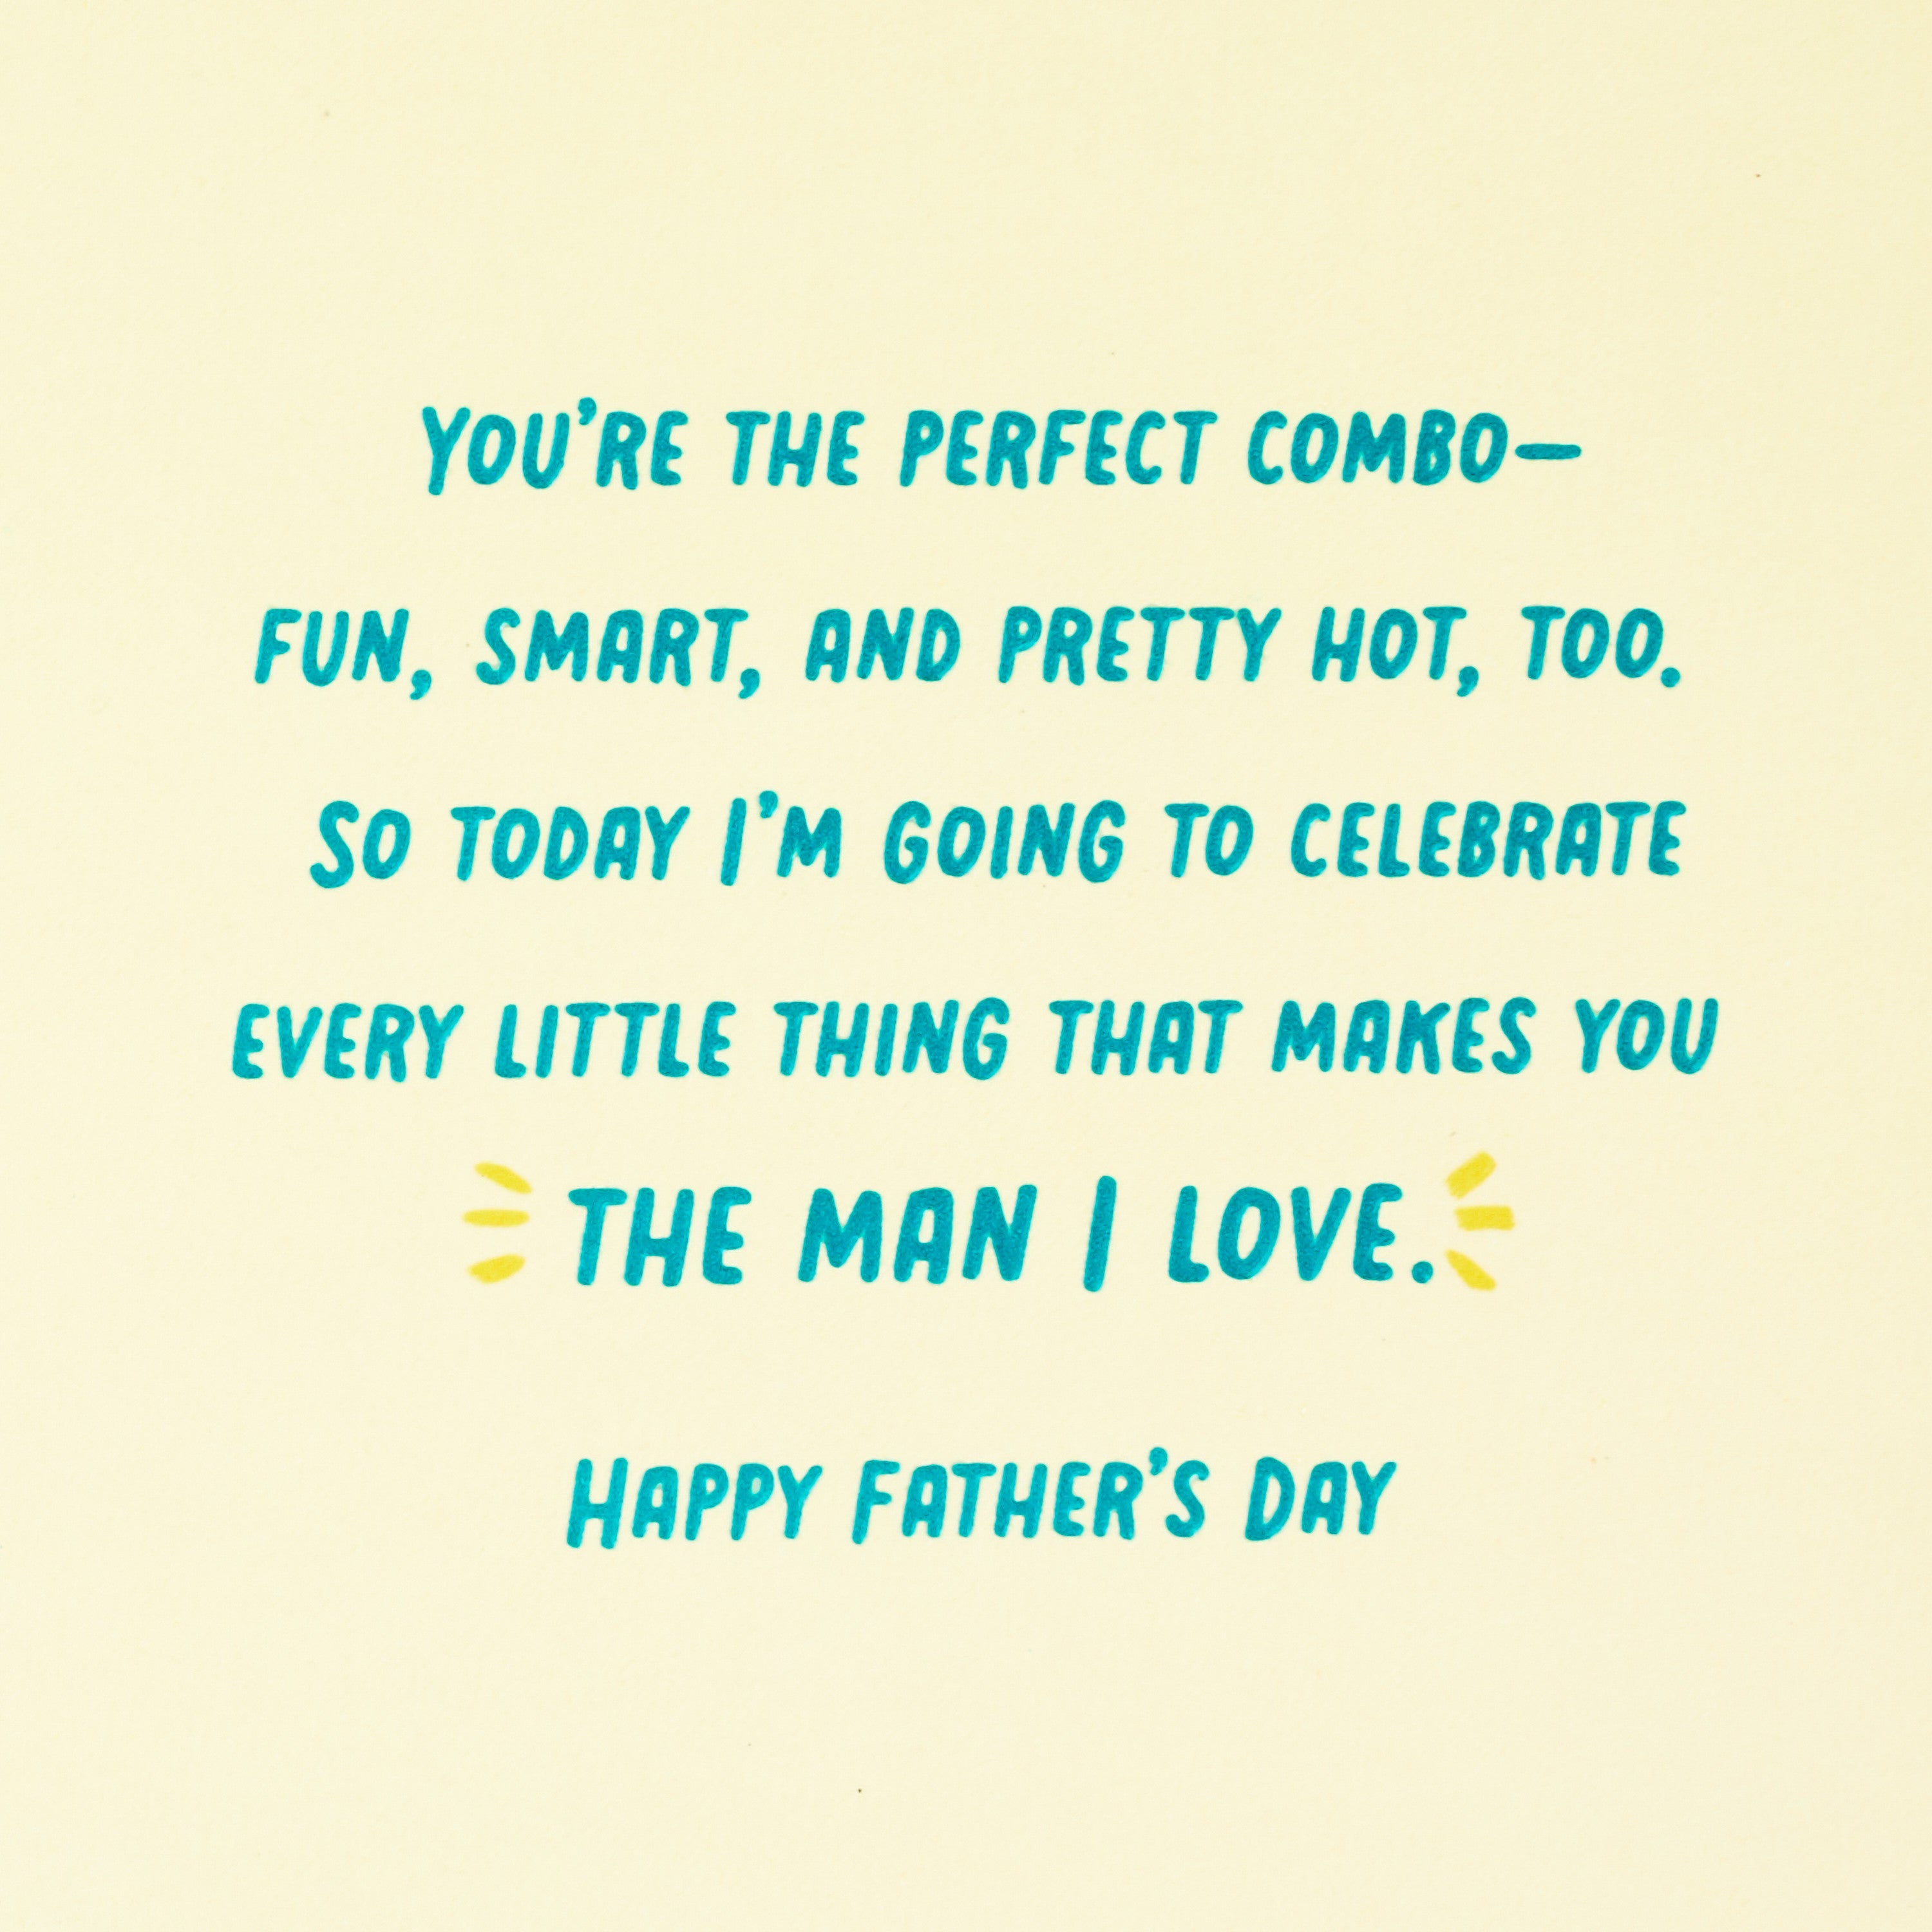 Fathers Day Card for Husband or Boyfriend (One Hot Dad)